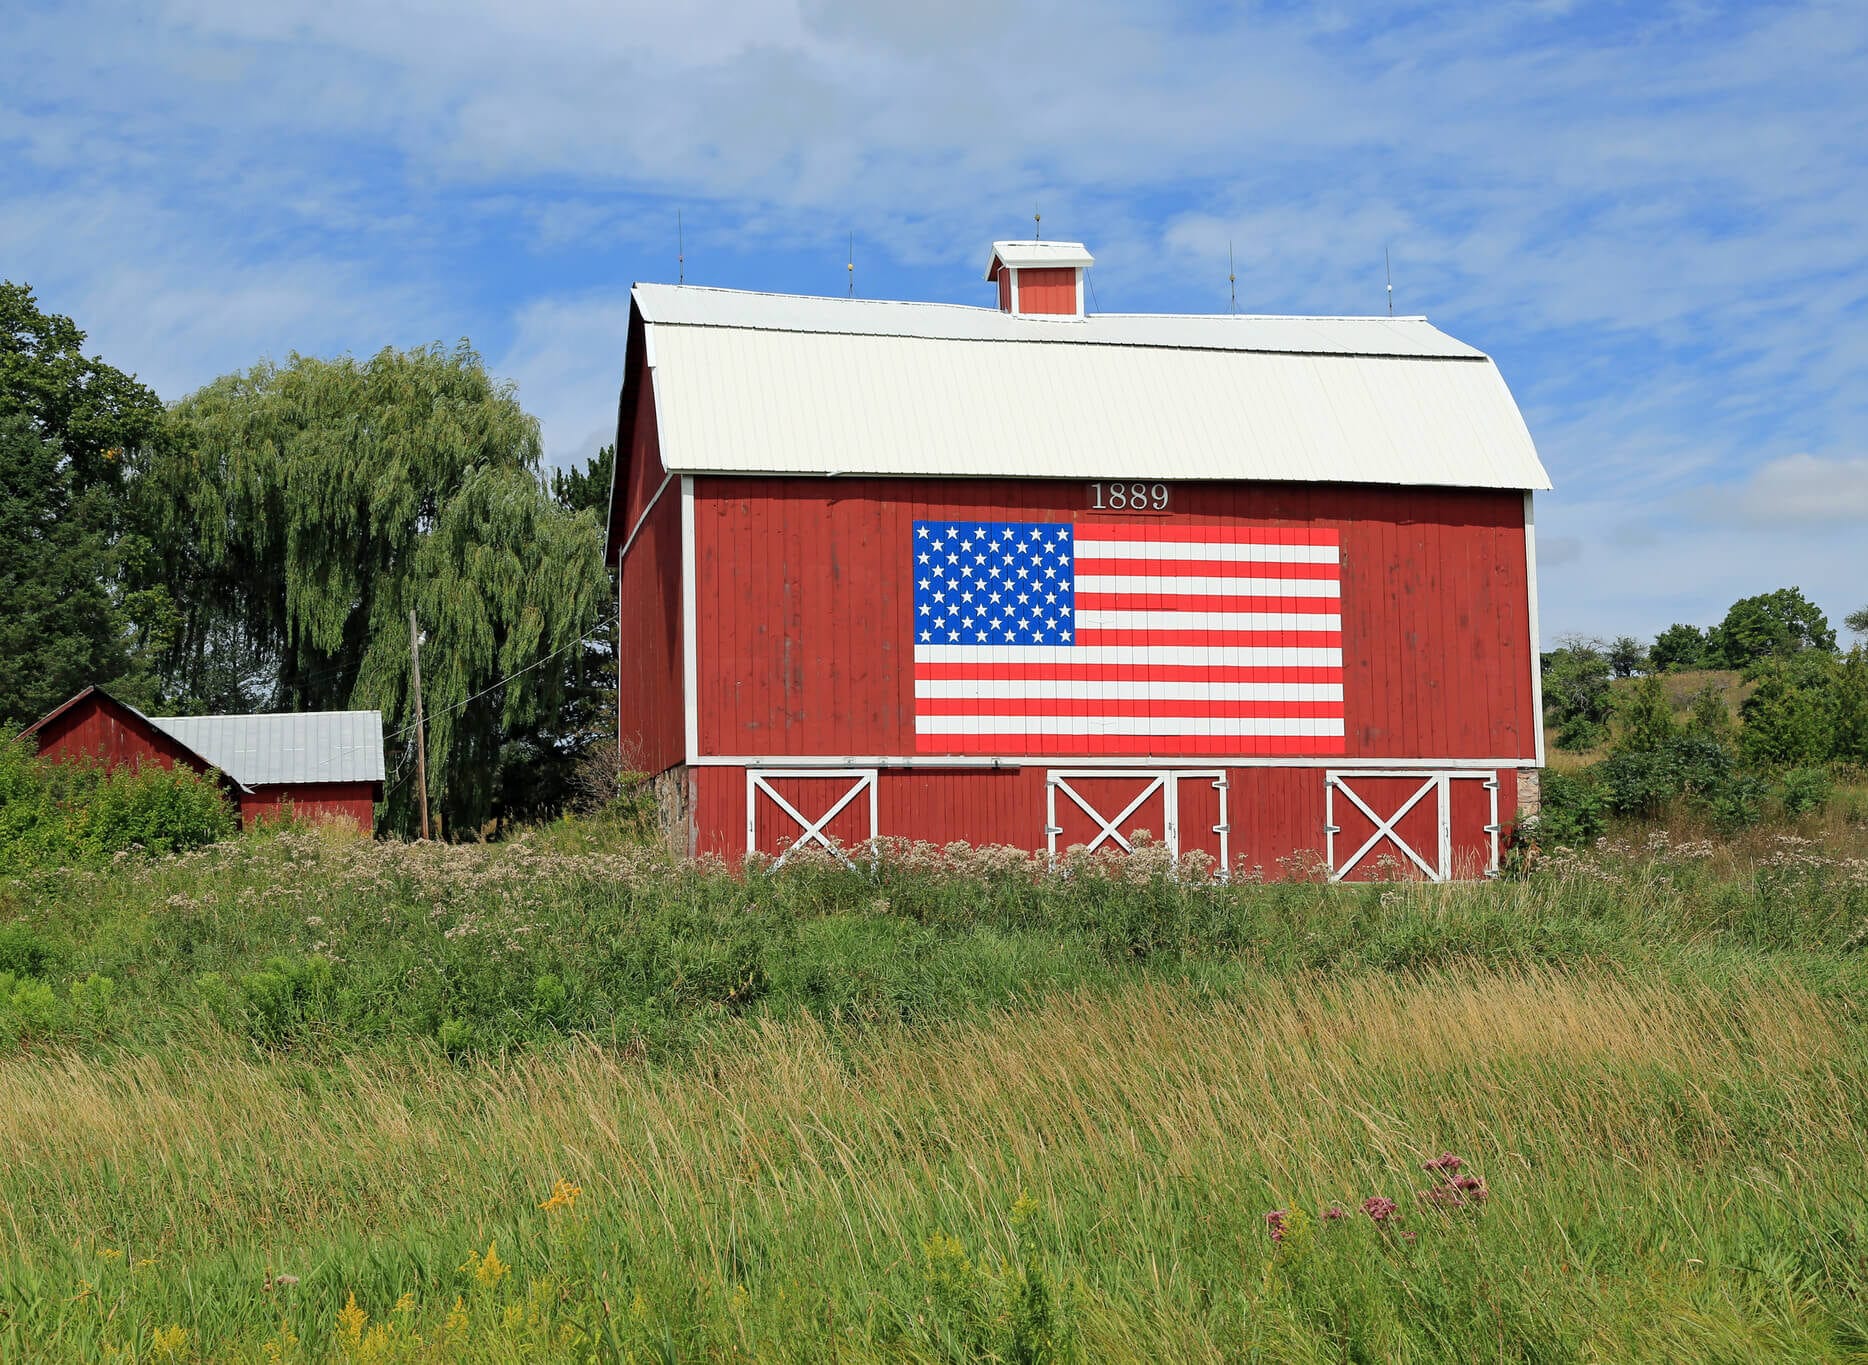 Barn painted with the American flag